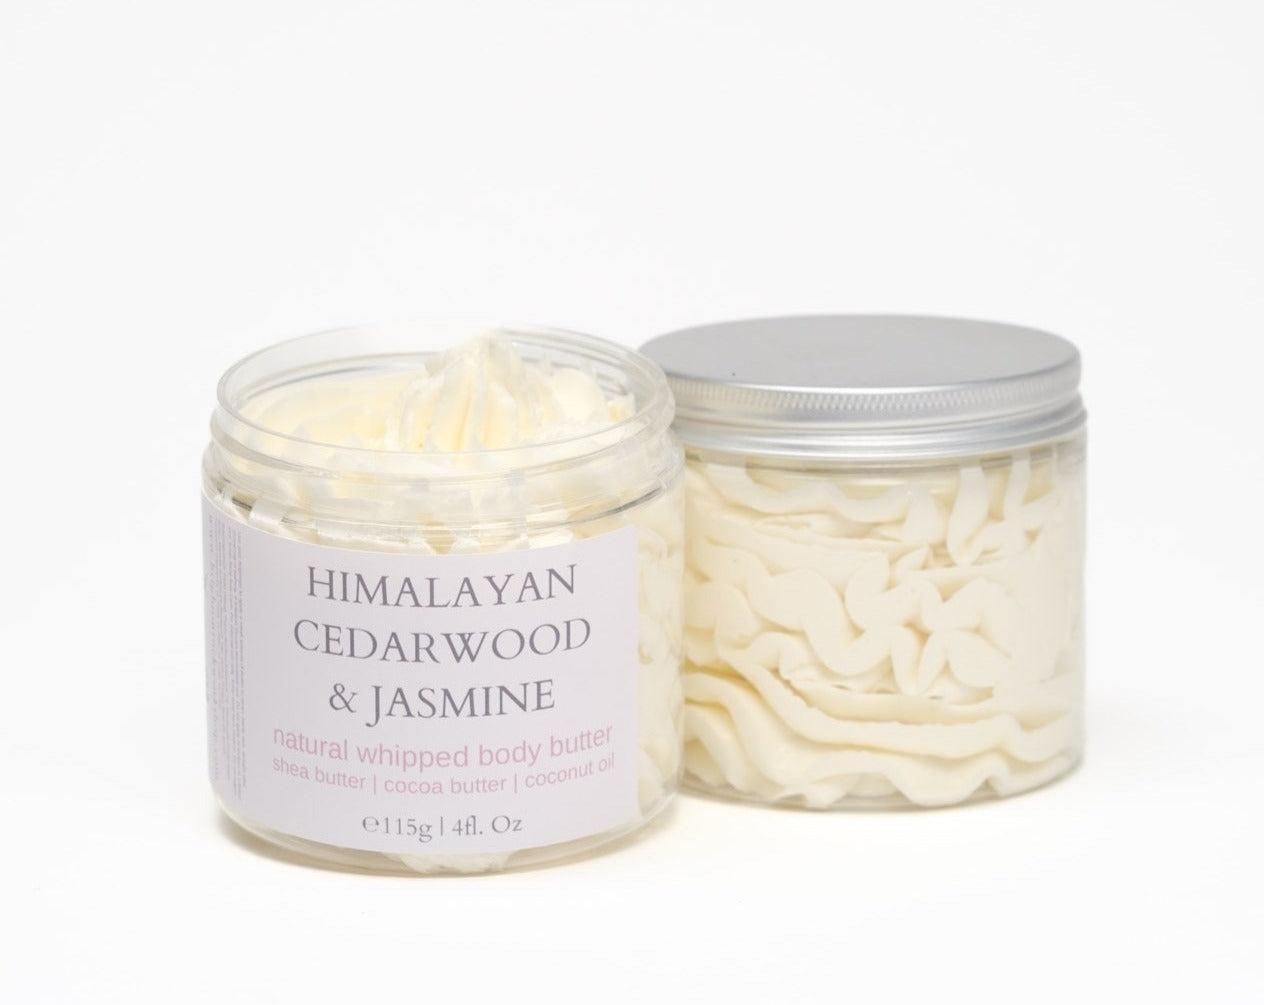 himalayan cedarwood and jasmine whipped body butter handmade in the UK by Brighton Rock Workshop. Vegan and natural skincare and gifts